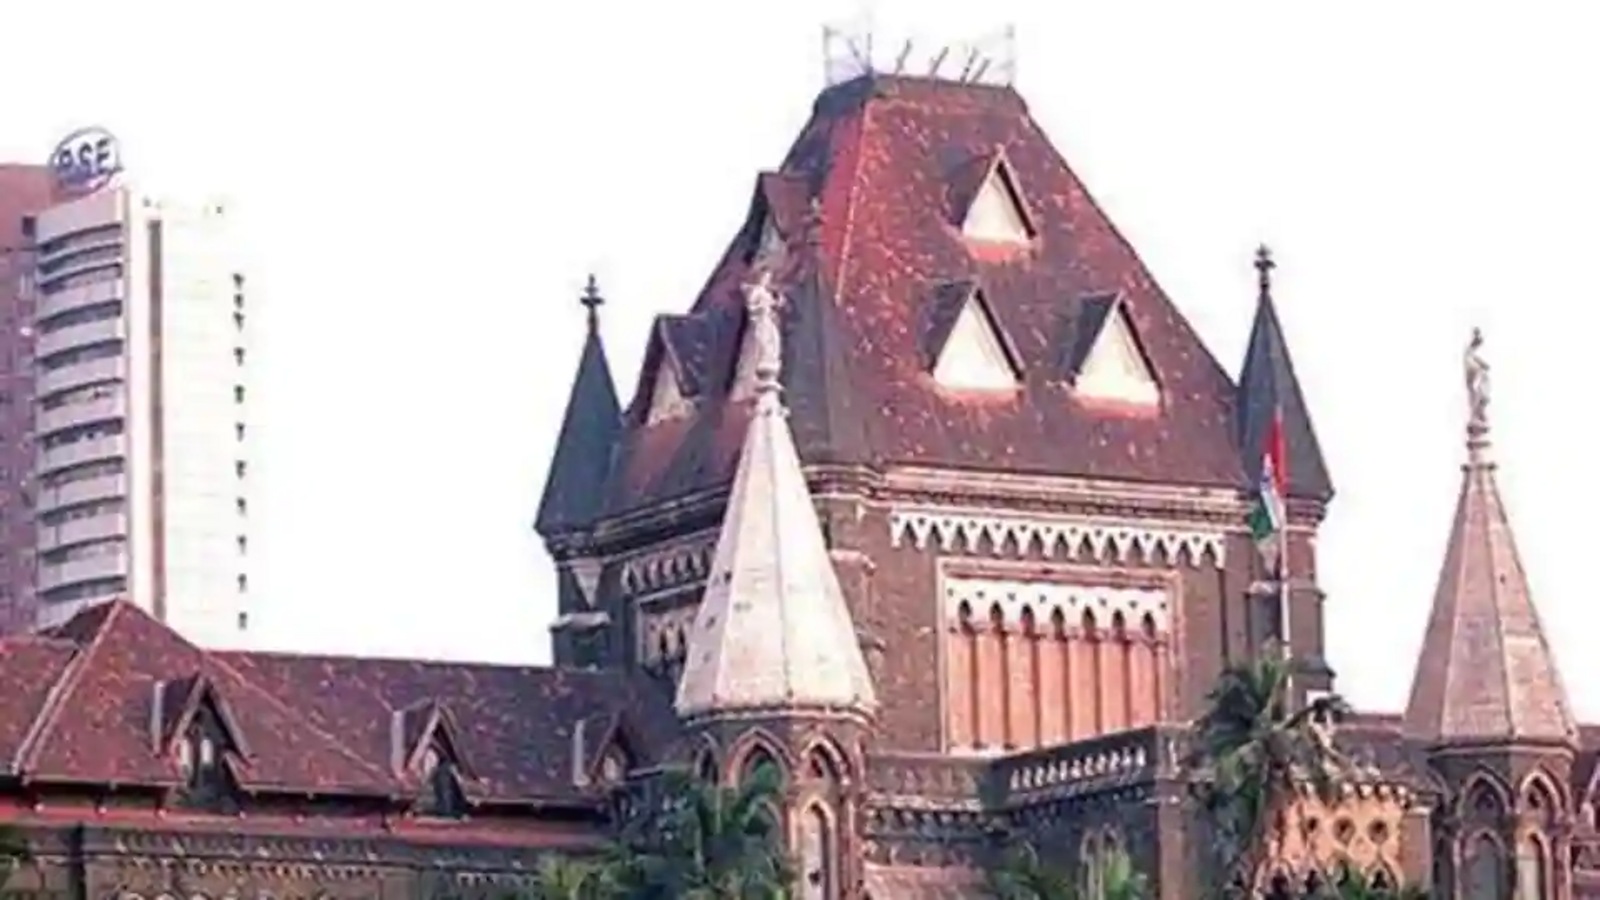 HC directs AG to visit jails, submit report on condition of prisoners | Mumbai news - Hindustan Times